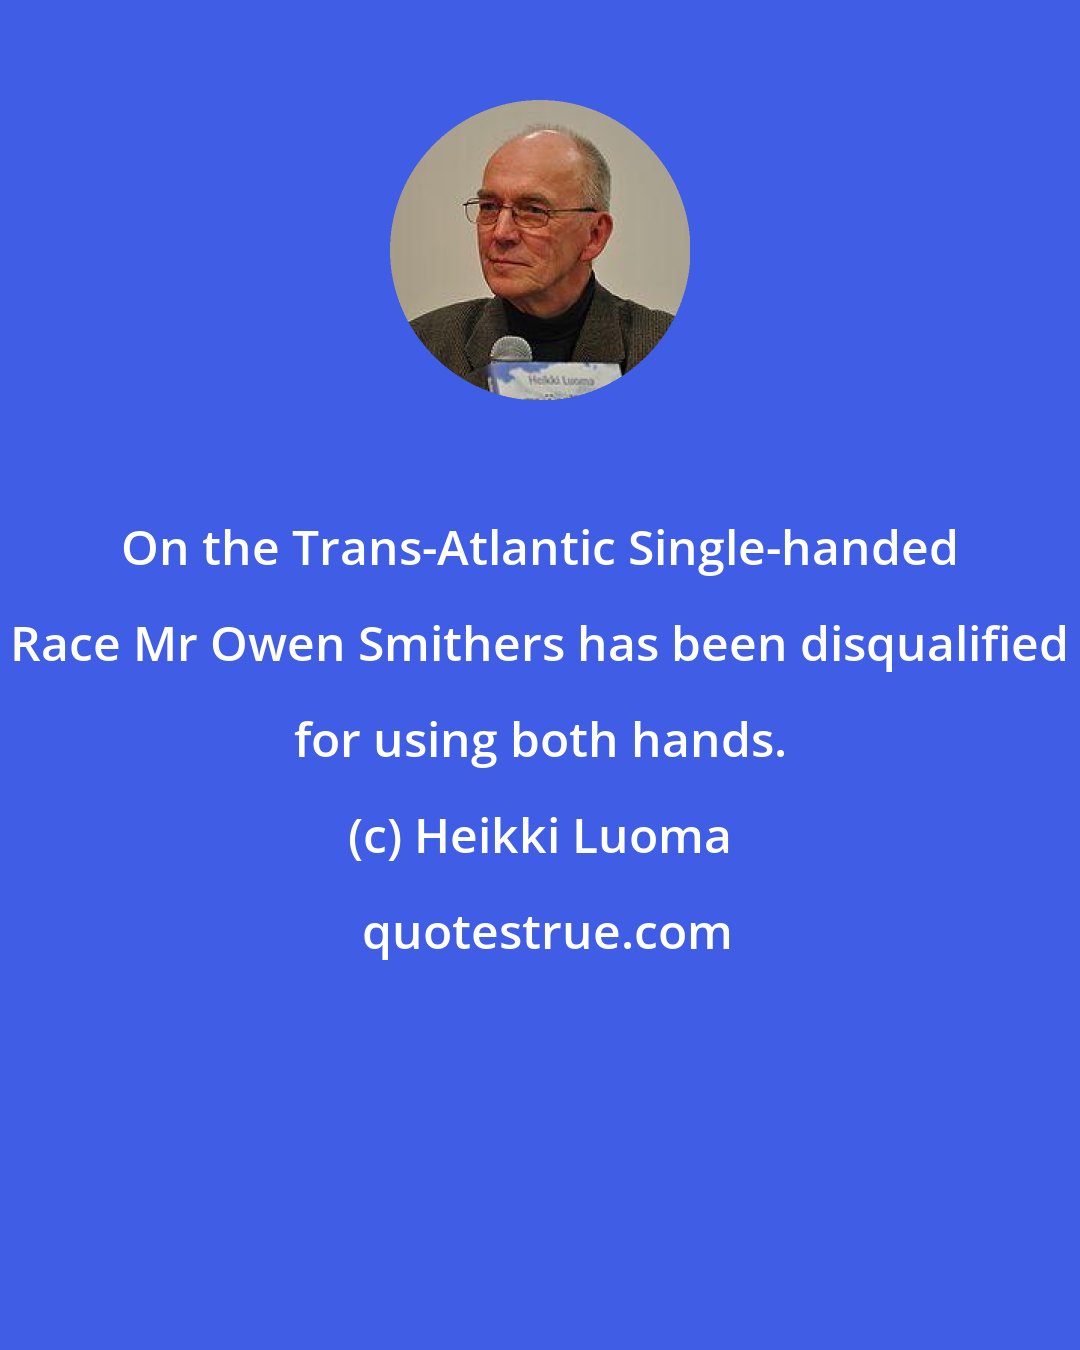 Heikki Luoma: On the Trans-Atlantic Single-handed Race Mr Owen Smithers has been disqualified for using both hands.